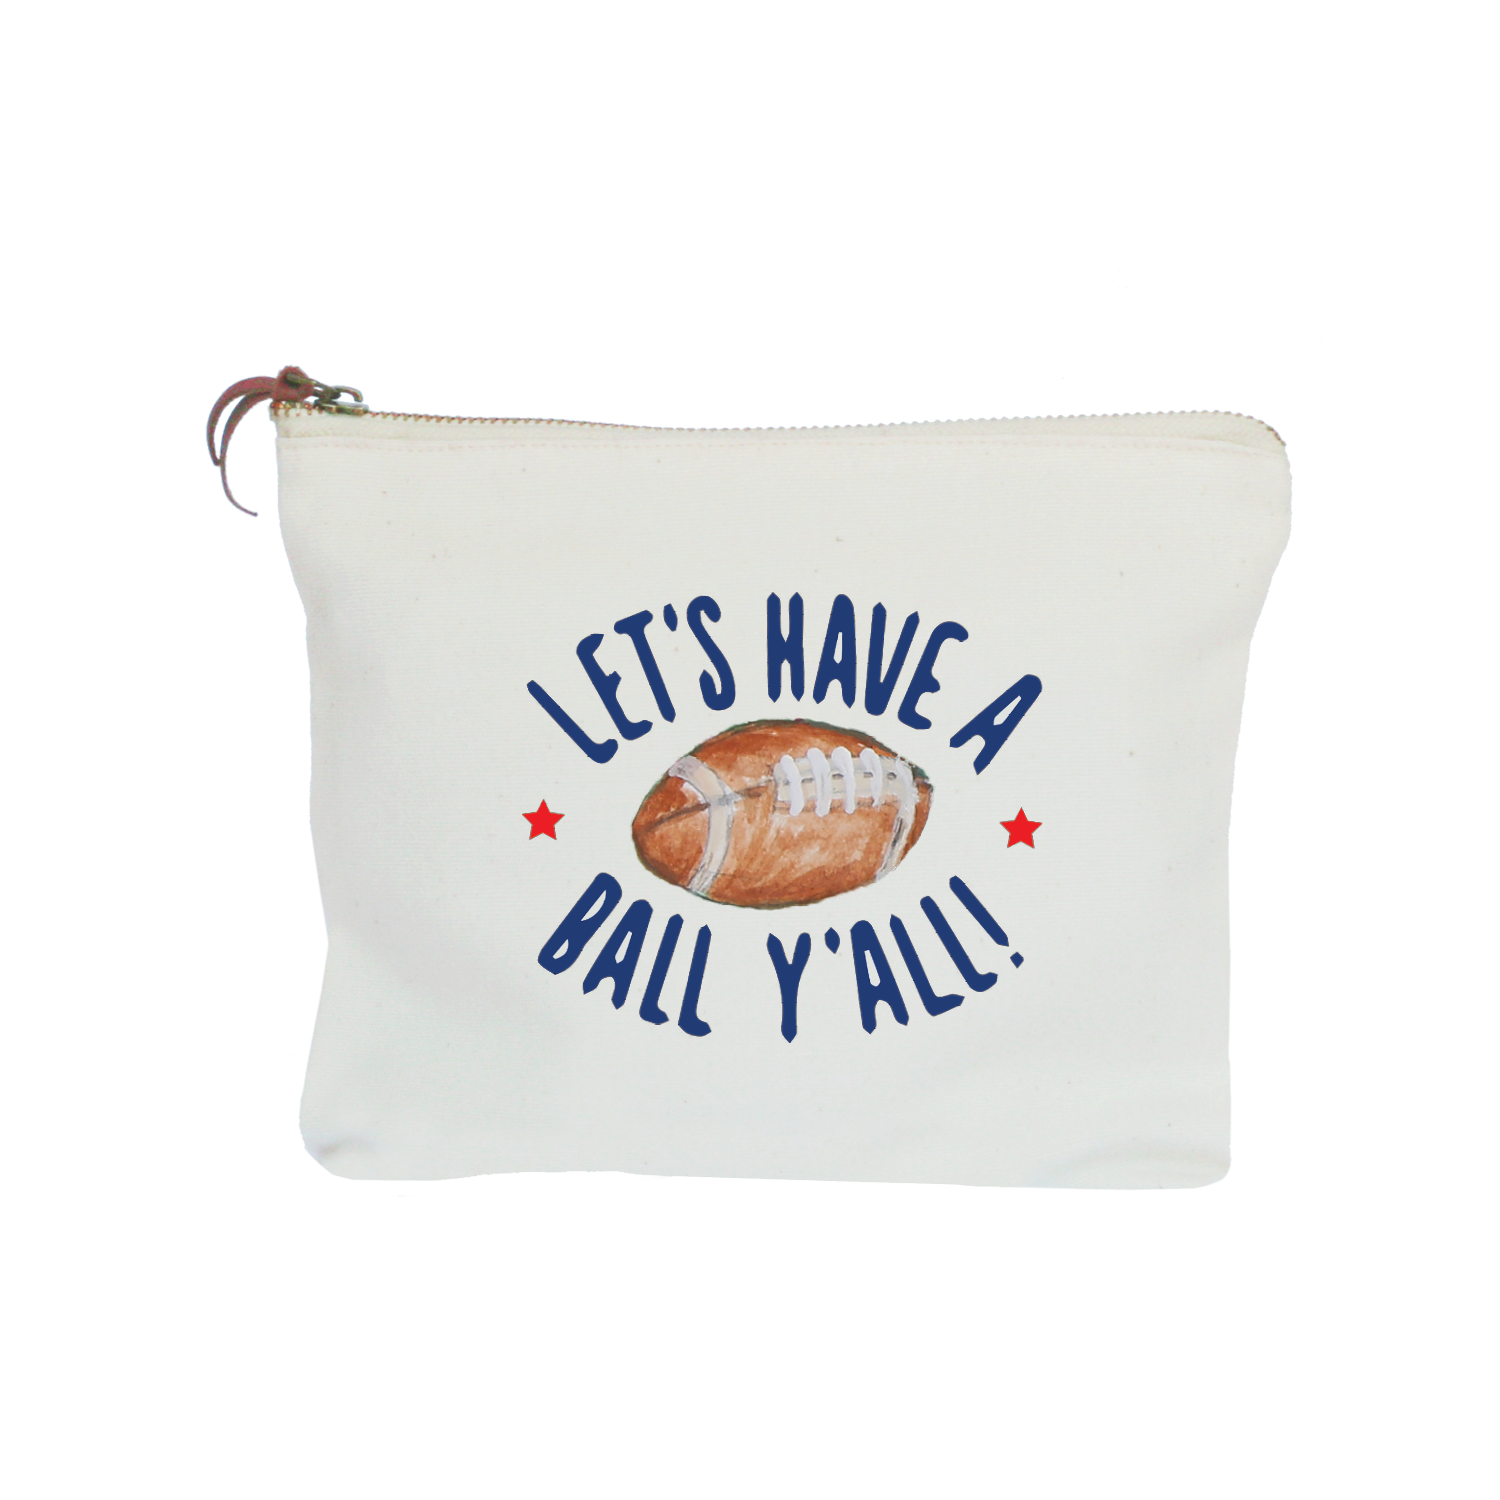 have a ball y'all zipper pouch